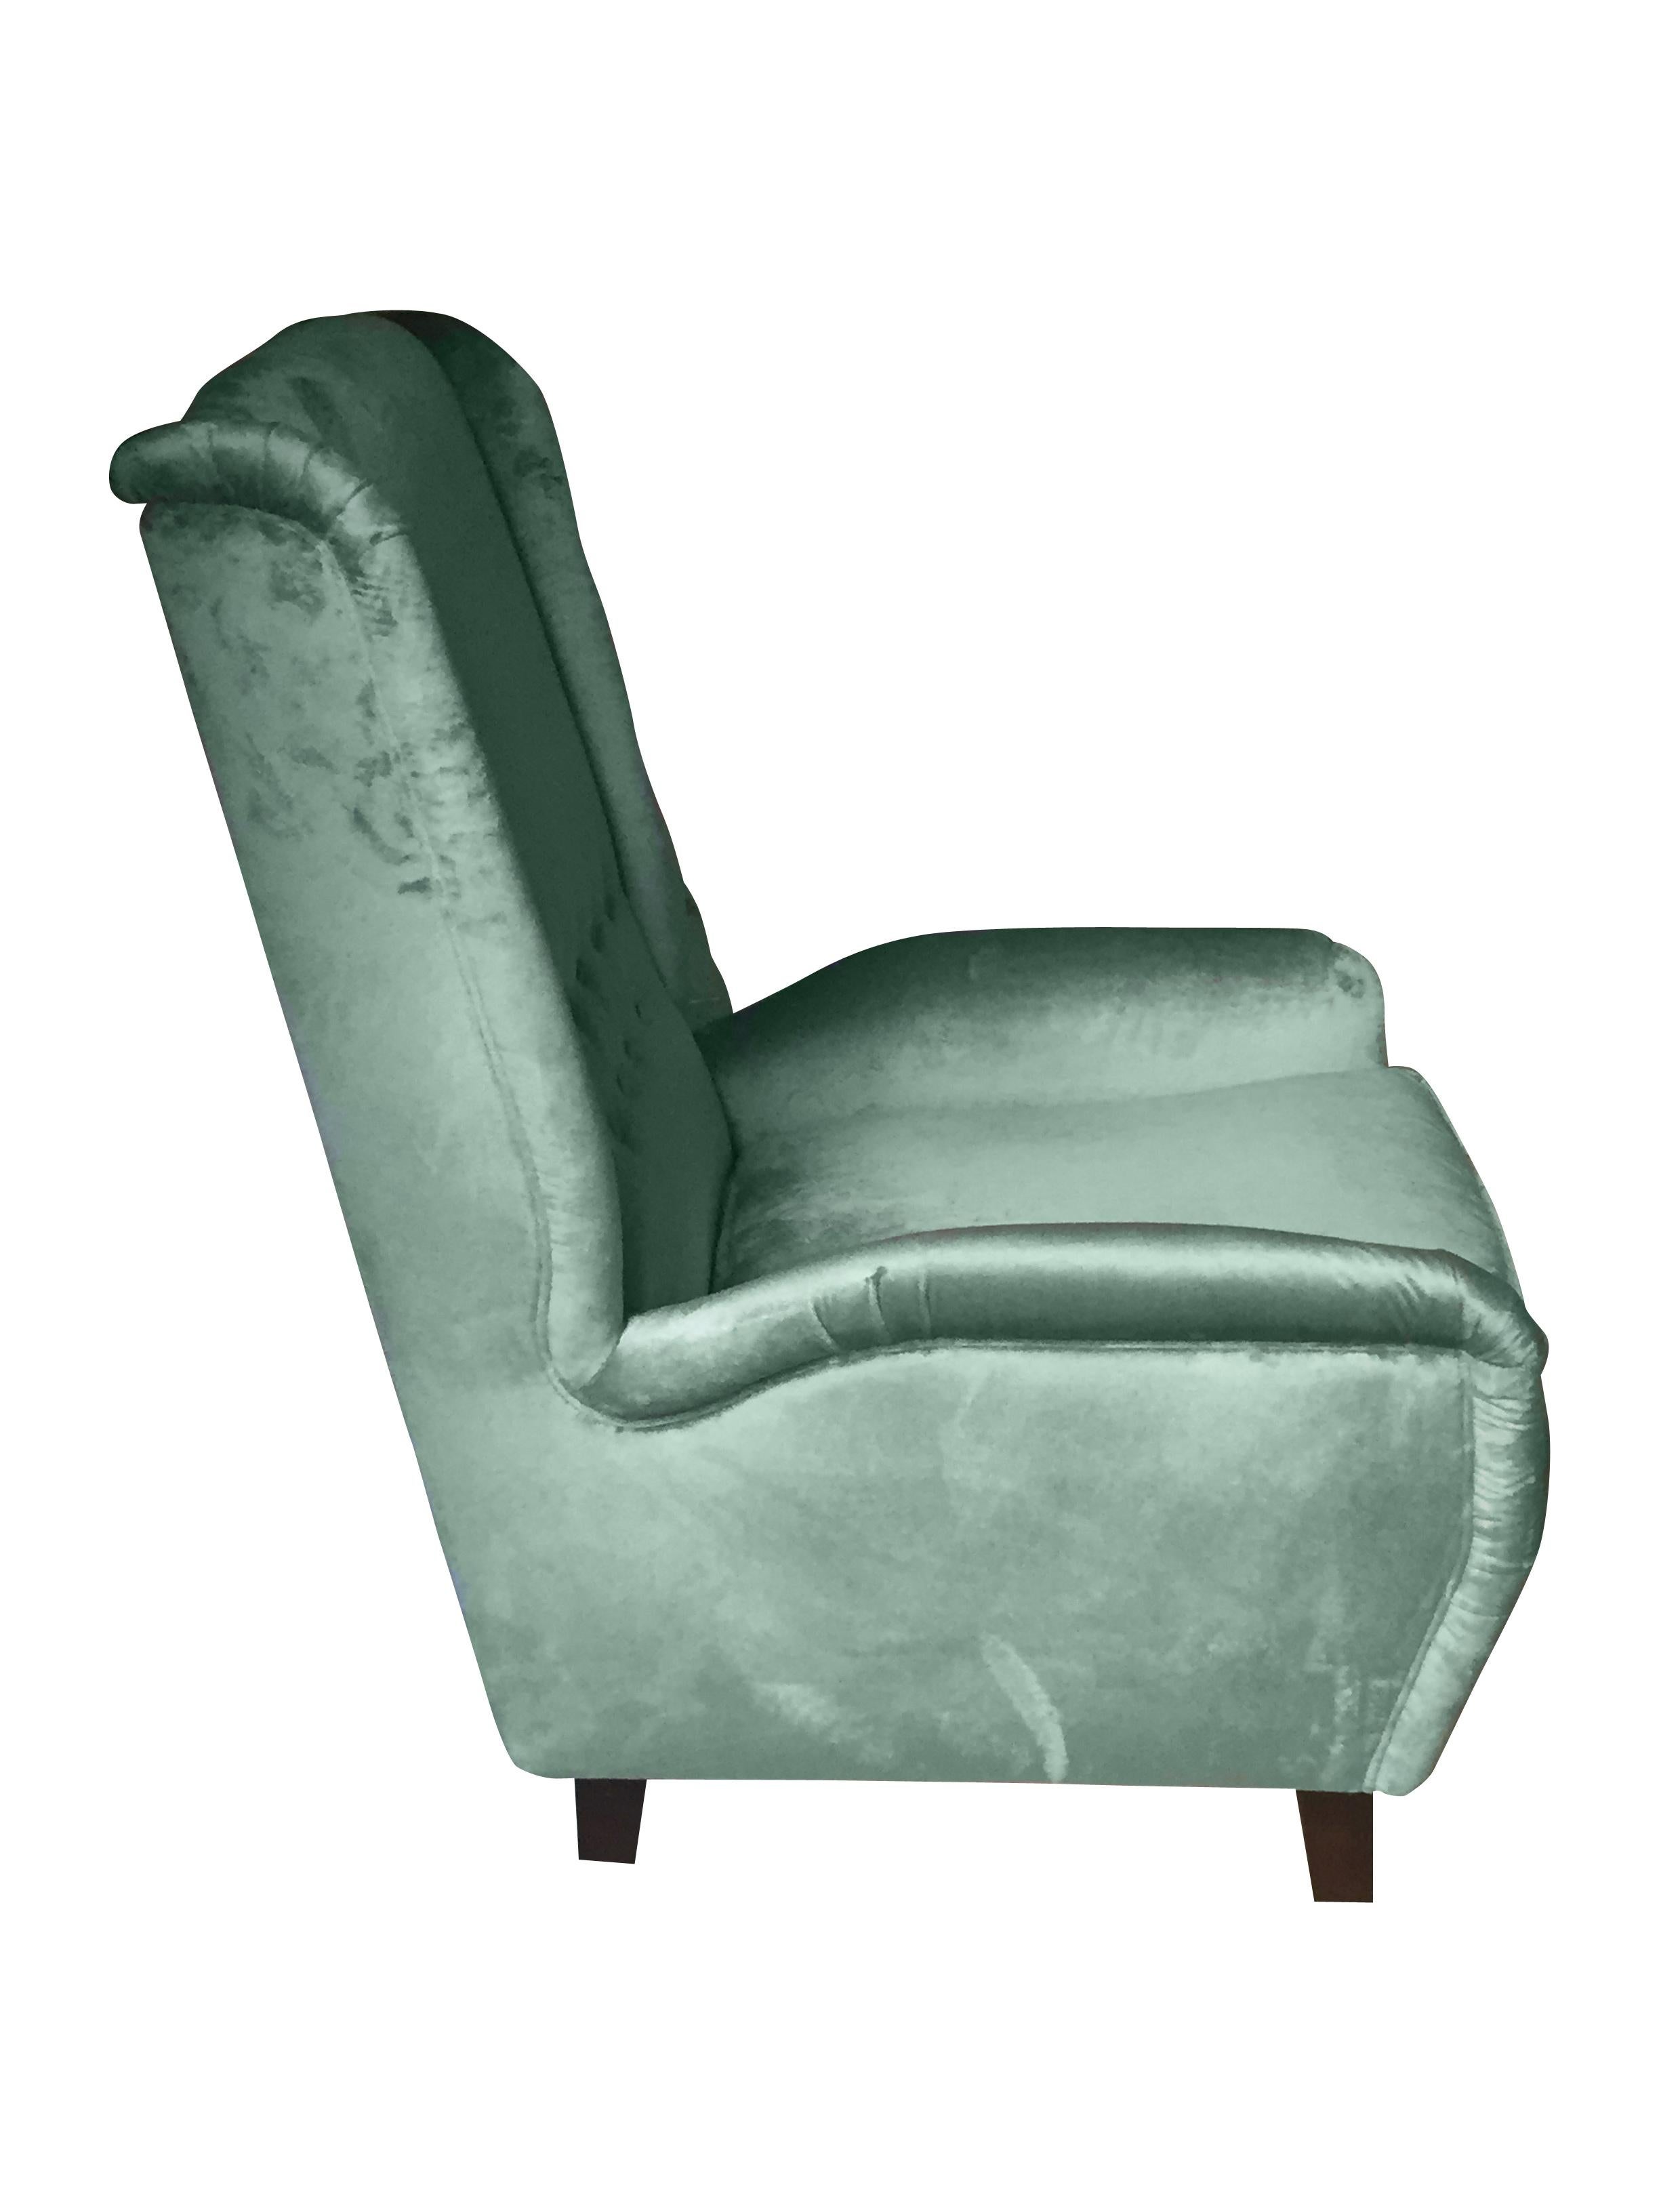 Very comfortable high back armchair, entirely handcrafted in Italy, a statement of elegance and modern Italian Design, with clean cut curved lines, elegantly indented sides, slightly embracing button-tufted back, raised on wooden legs and